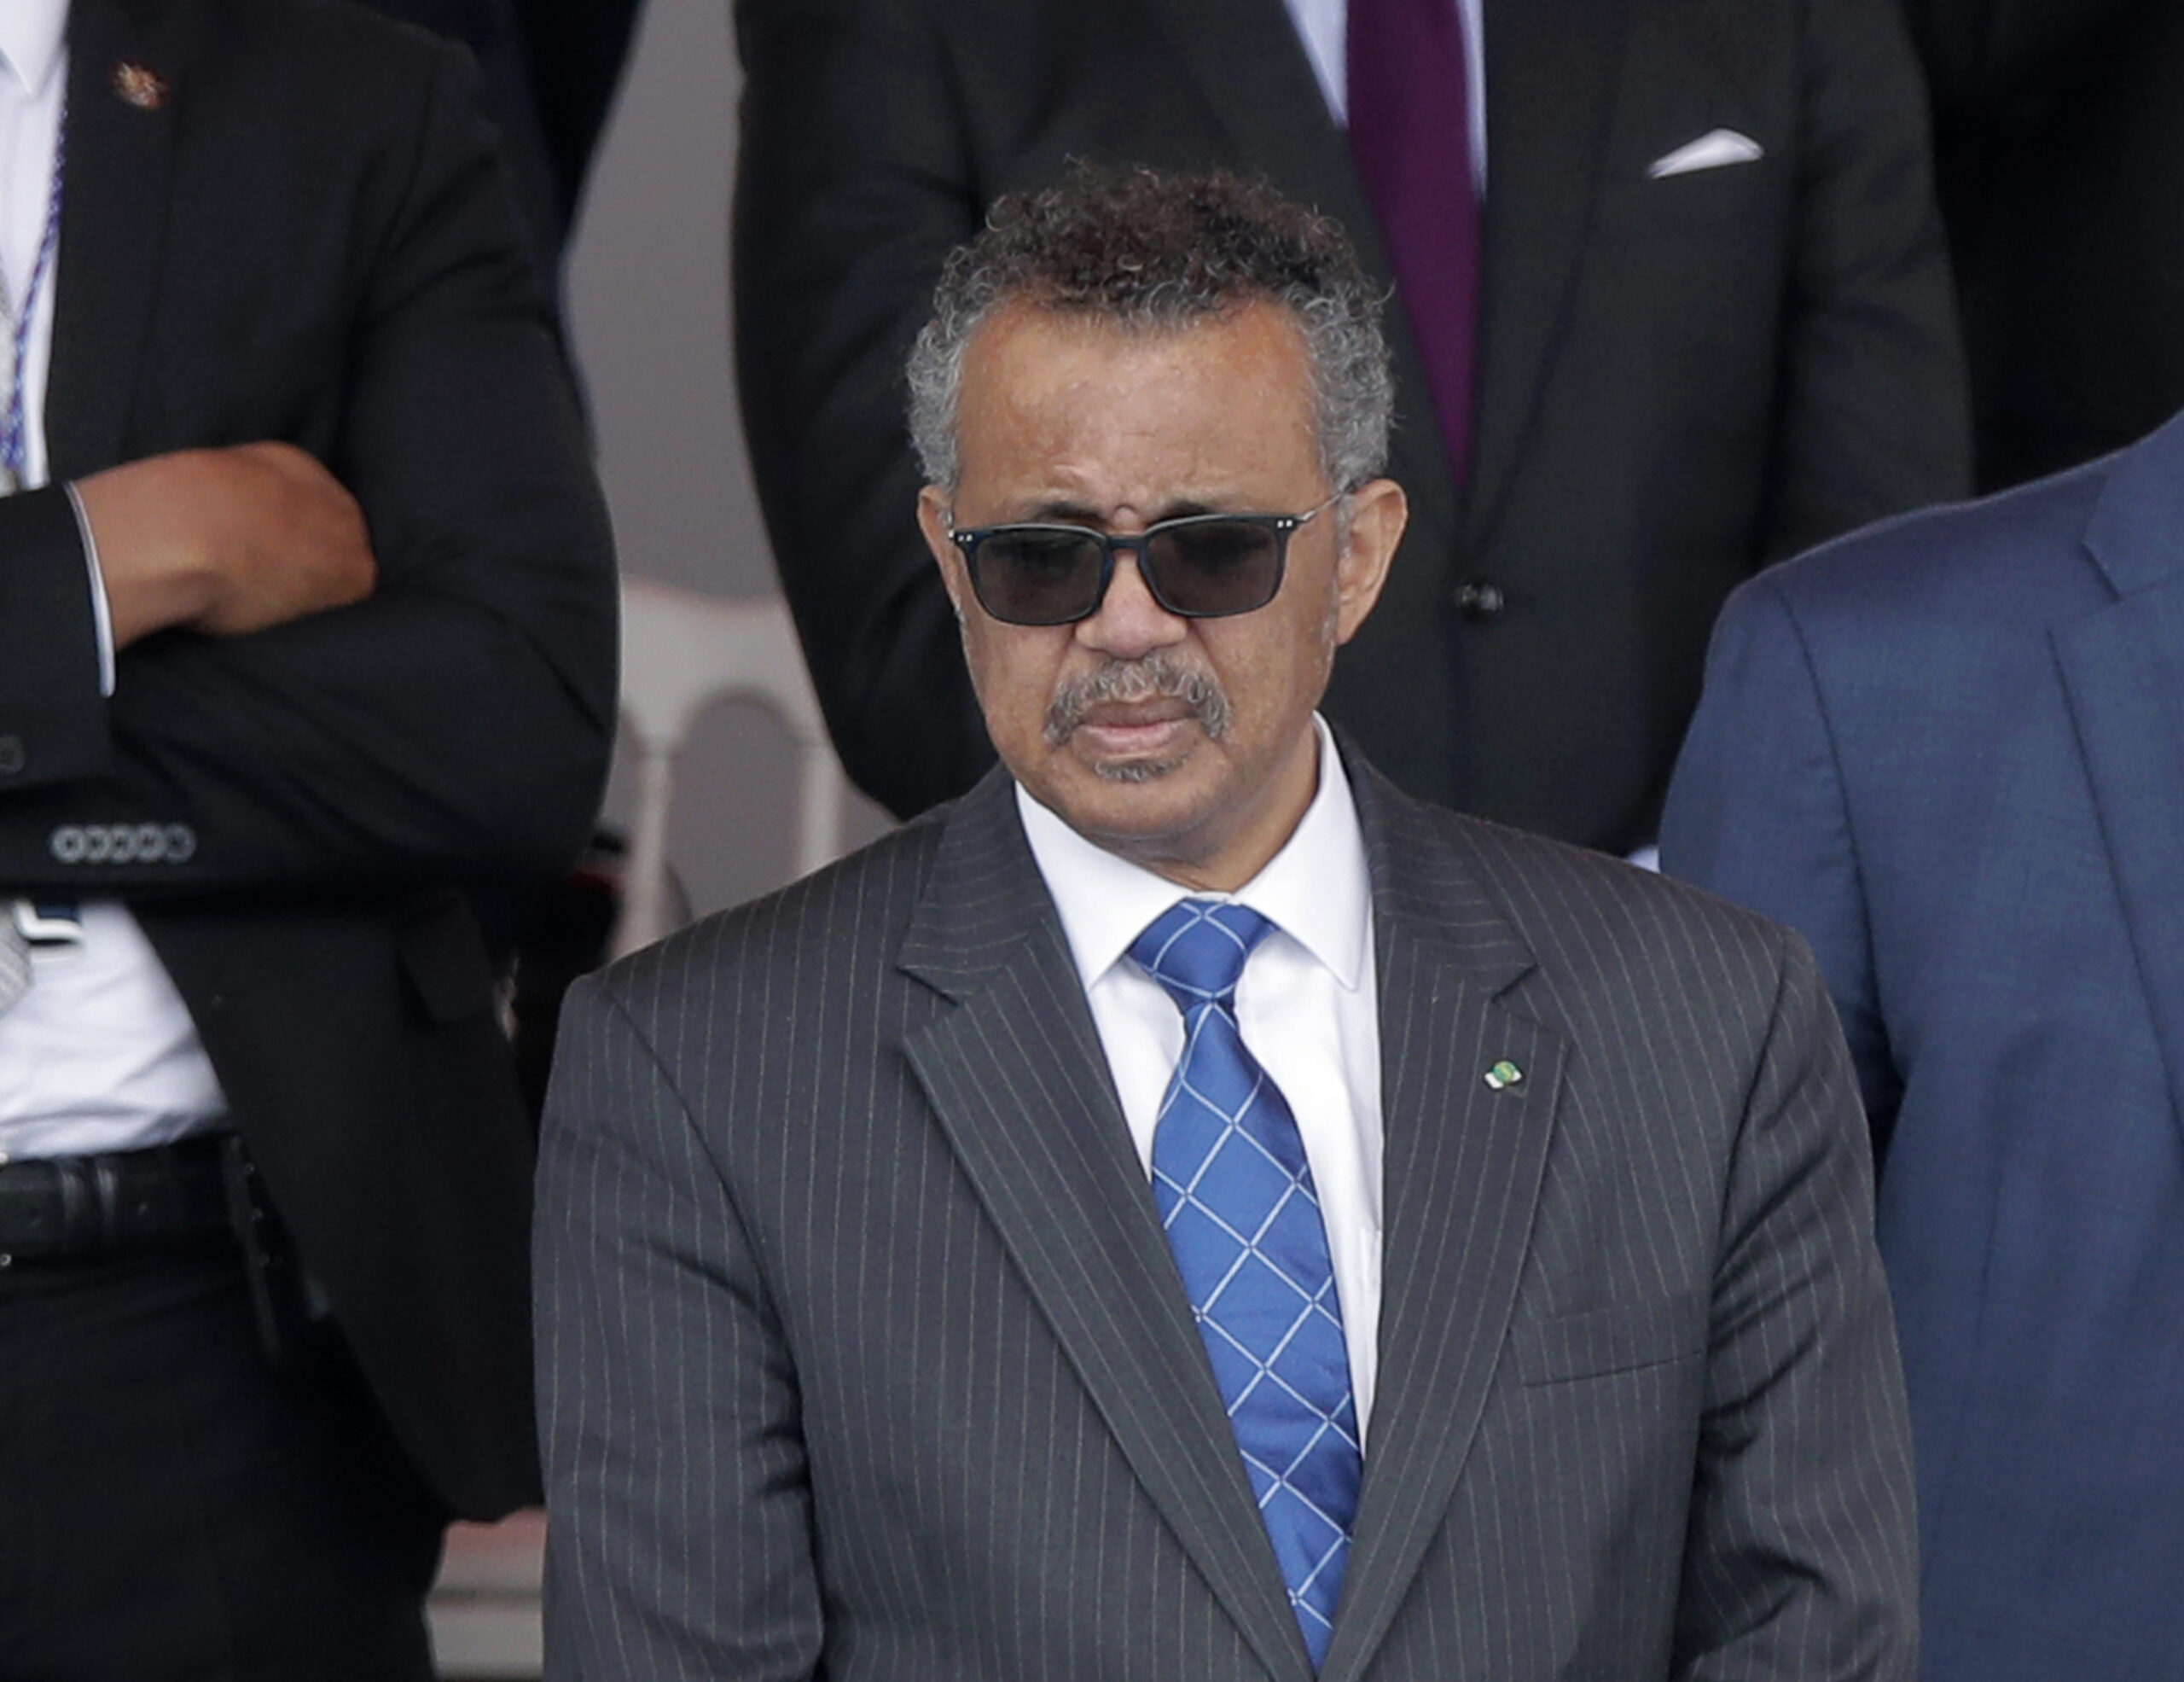 FILE - In this file photo dated Tuesday, July 14, 2020, Director General of the World Health Organization, Tedros Adhanom Ghebreyesus, attends the Bastille Day military parade, in Paris. The head of the World Health Organization has appealed Wednesday Aug. 4, 2021, for a moratorium on administering booster shots of COVID-19 vaccines, to ensure doses are available in countries where few people have yet received their first shots. (AP Photo/Christophe Ena, FILE)